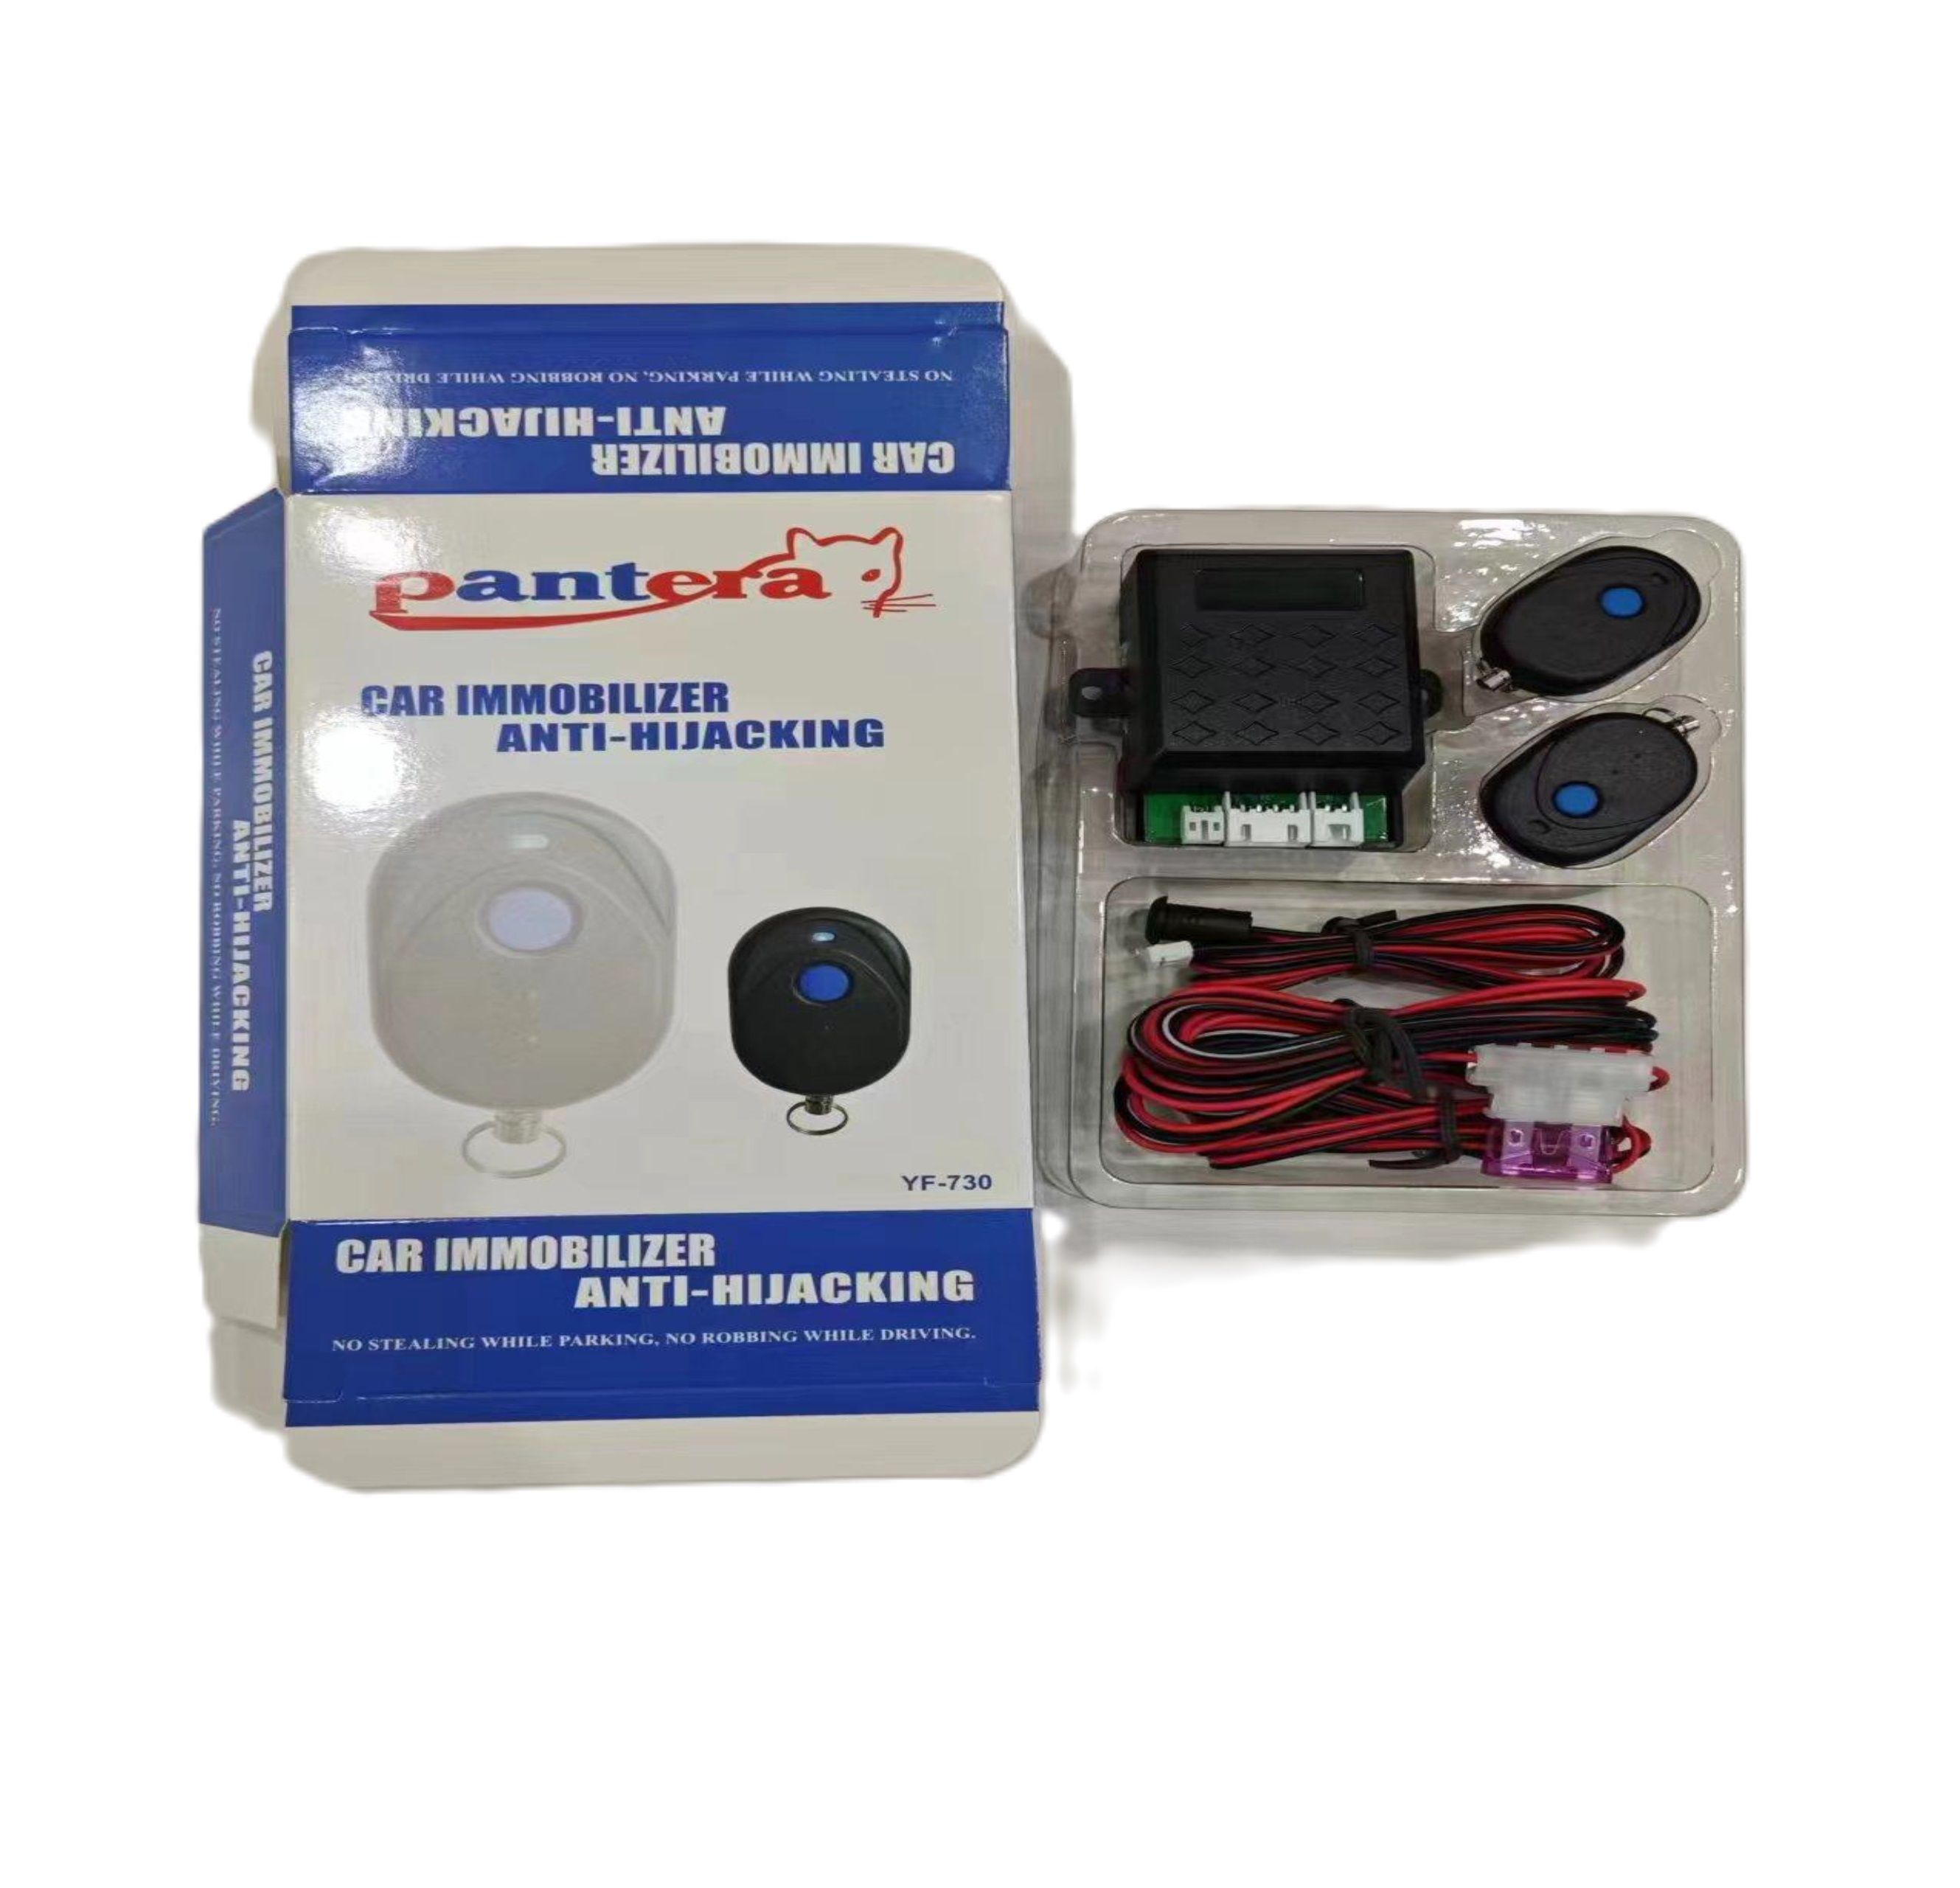 Universal car immobilizer anti theft system